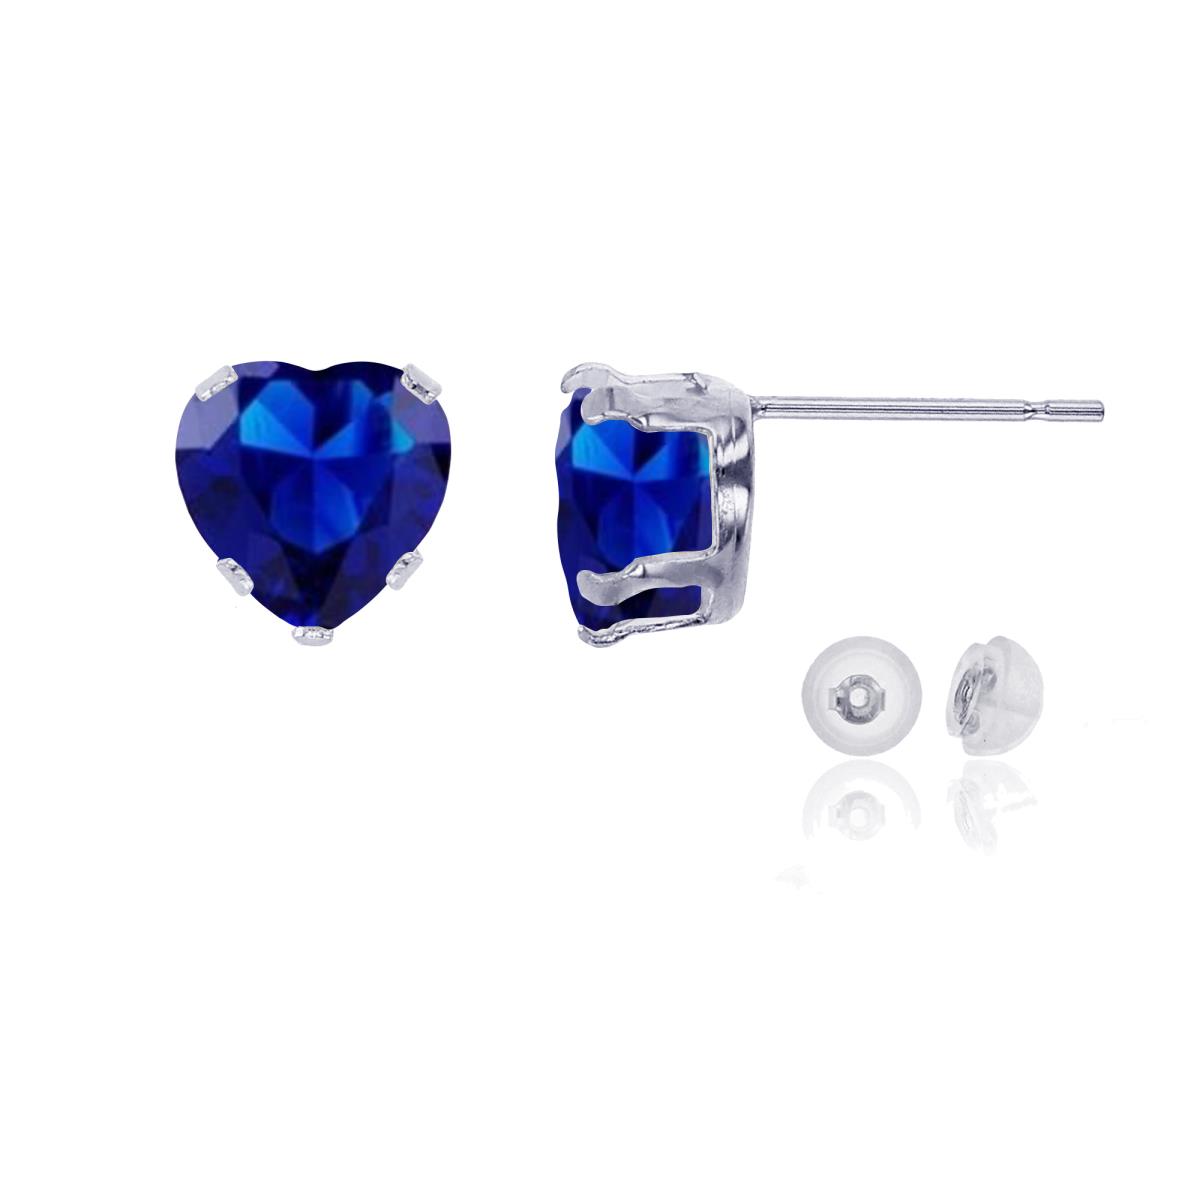 14K White Gold 6x6mm Heart Cr Blue Sapphire Stud Earring with Silicone Back